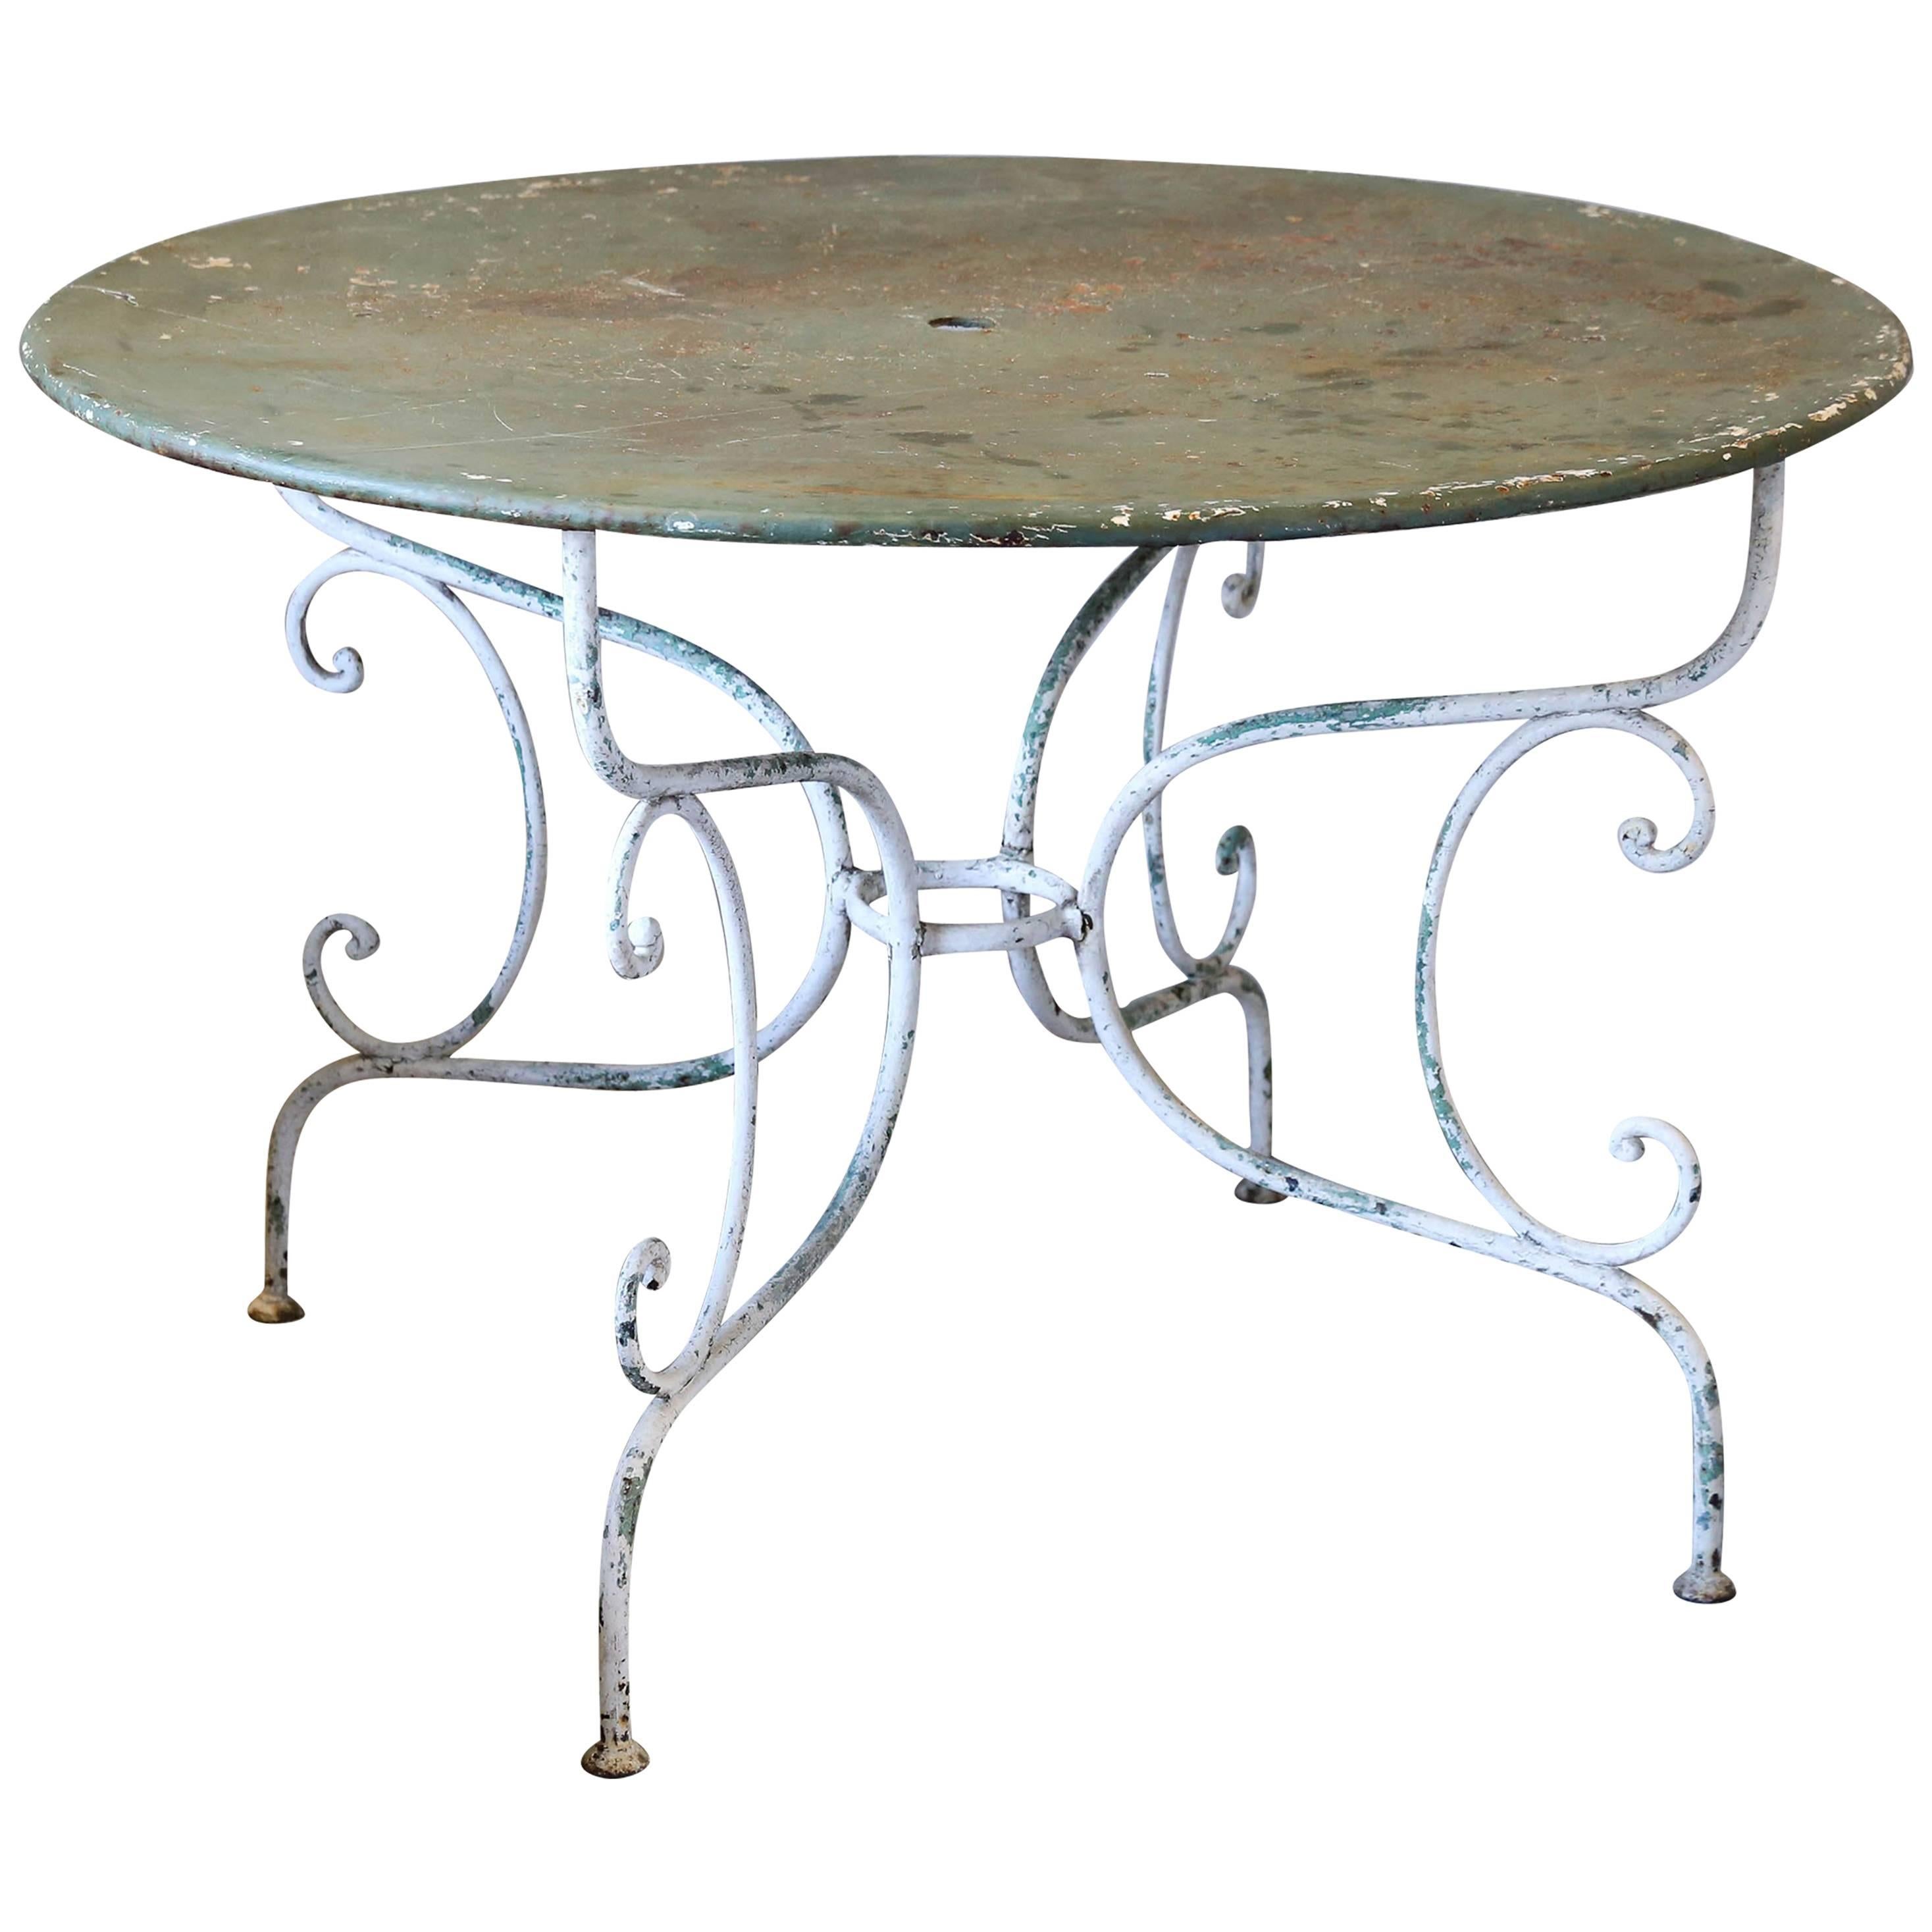 1930s Rustic Metal Garden Table Found in France